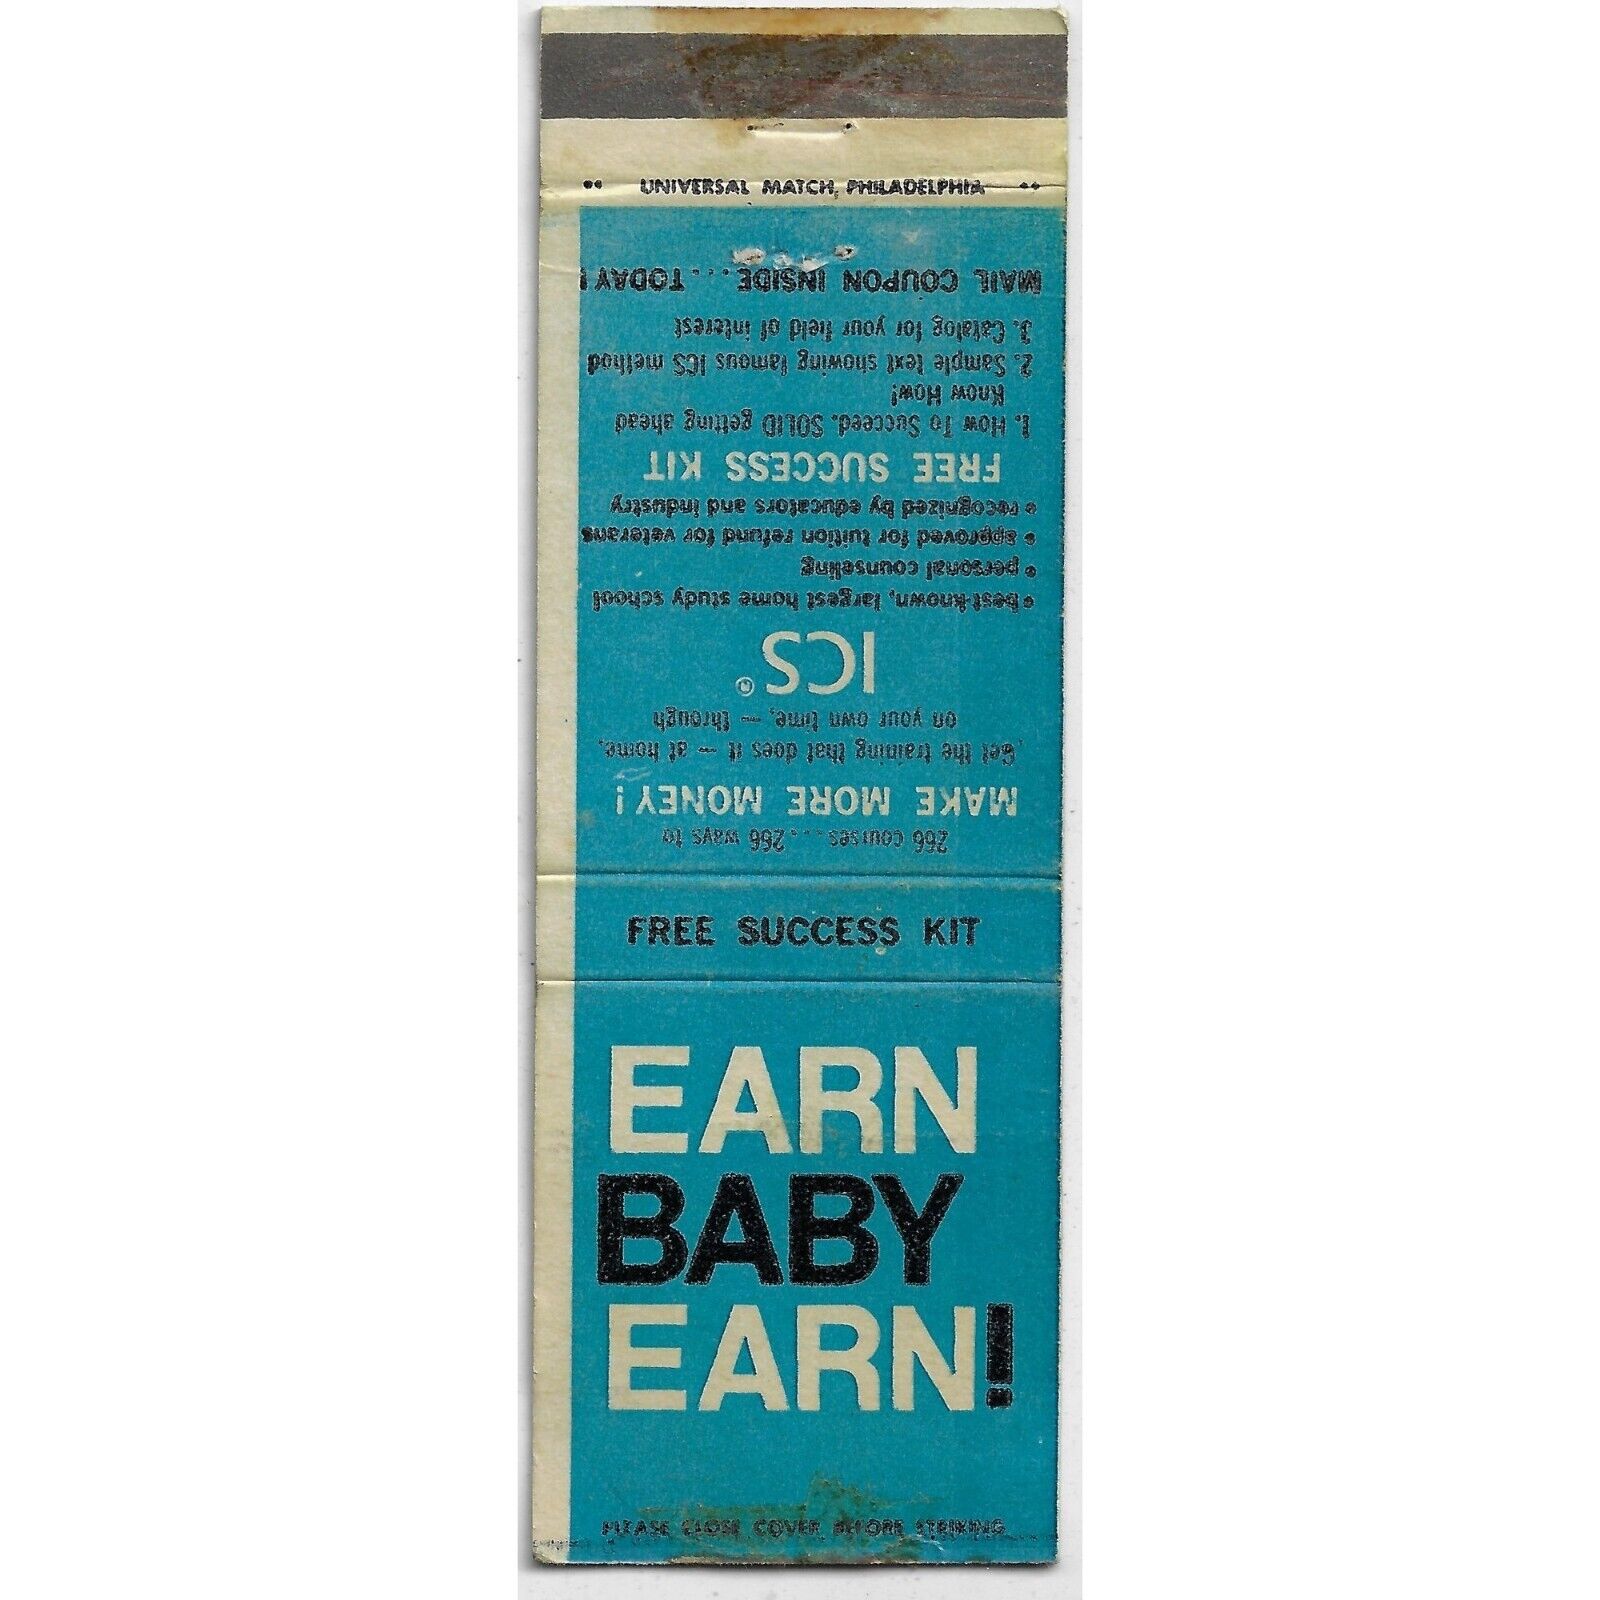 Earn Baby Earn Free Success Kit Correspondence Schools Empty Matchbook Cover